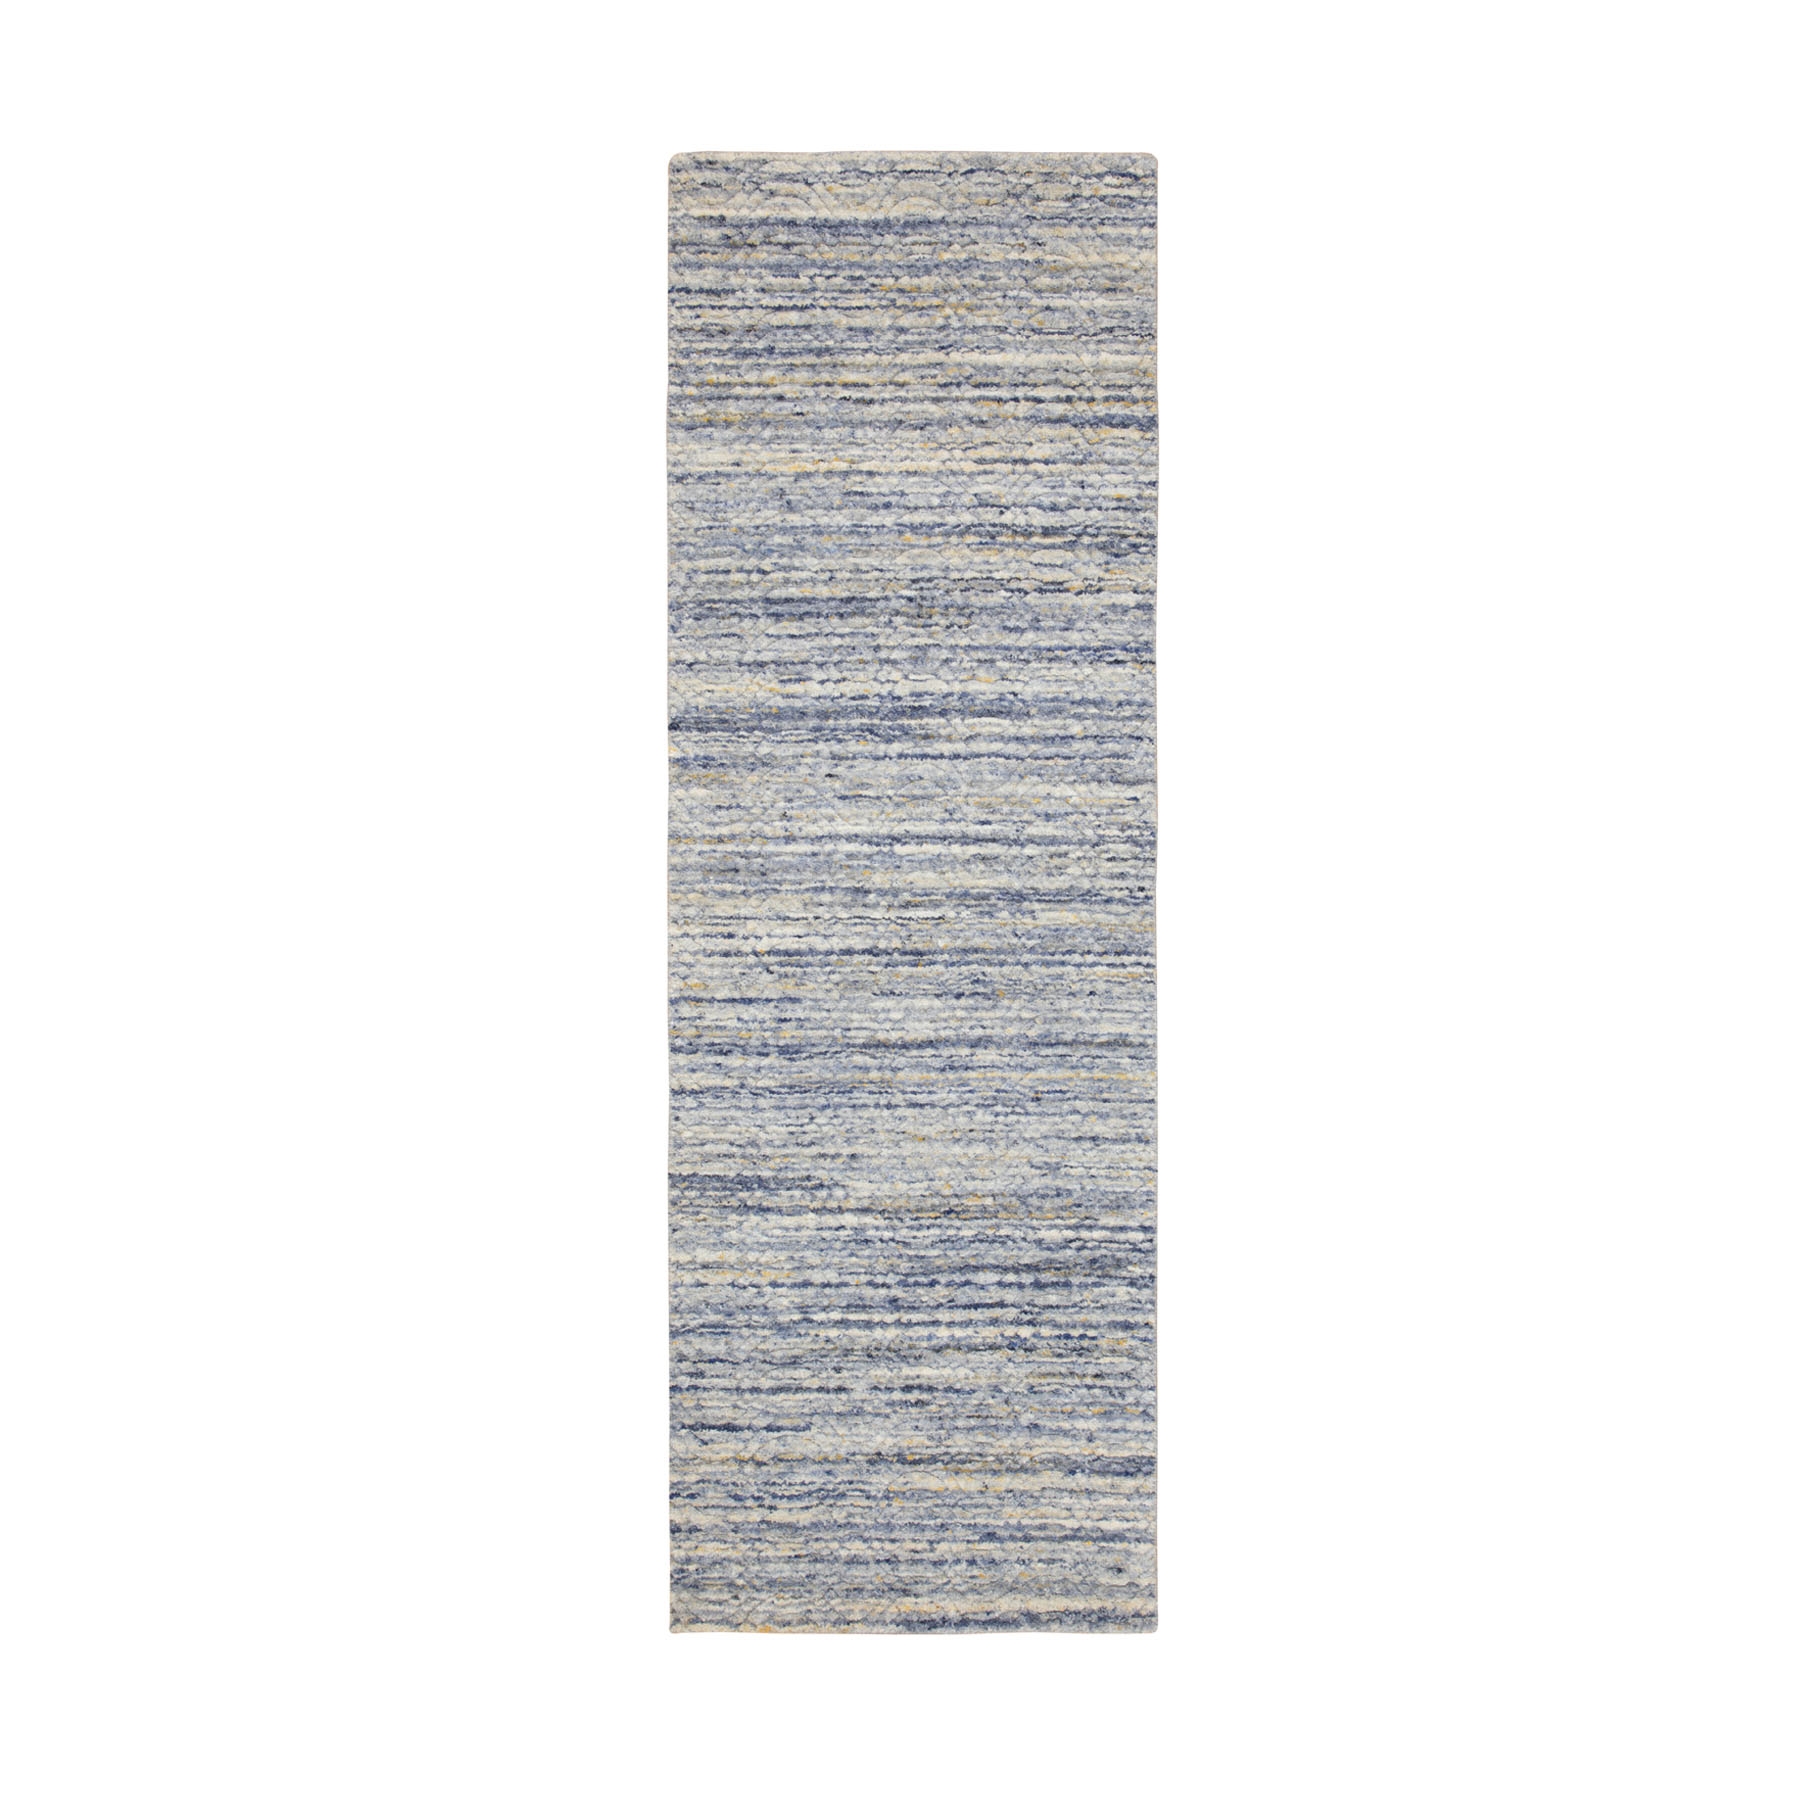 Modern & Contemporary Wool Hand-Woven Area Rug 2'6